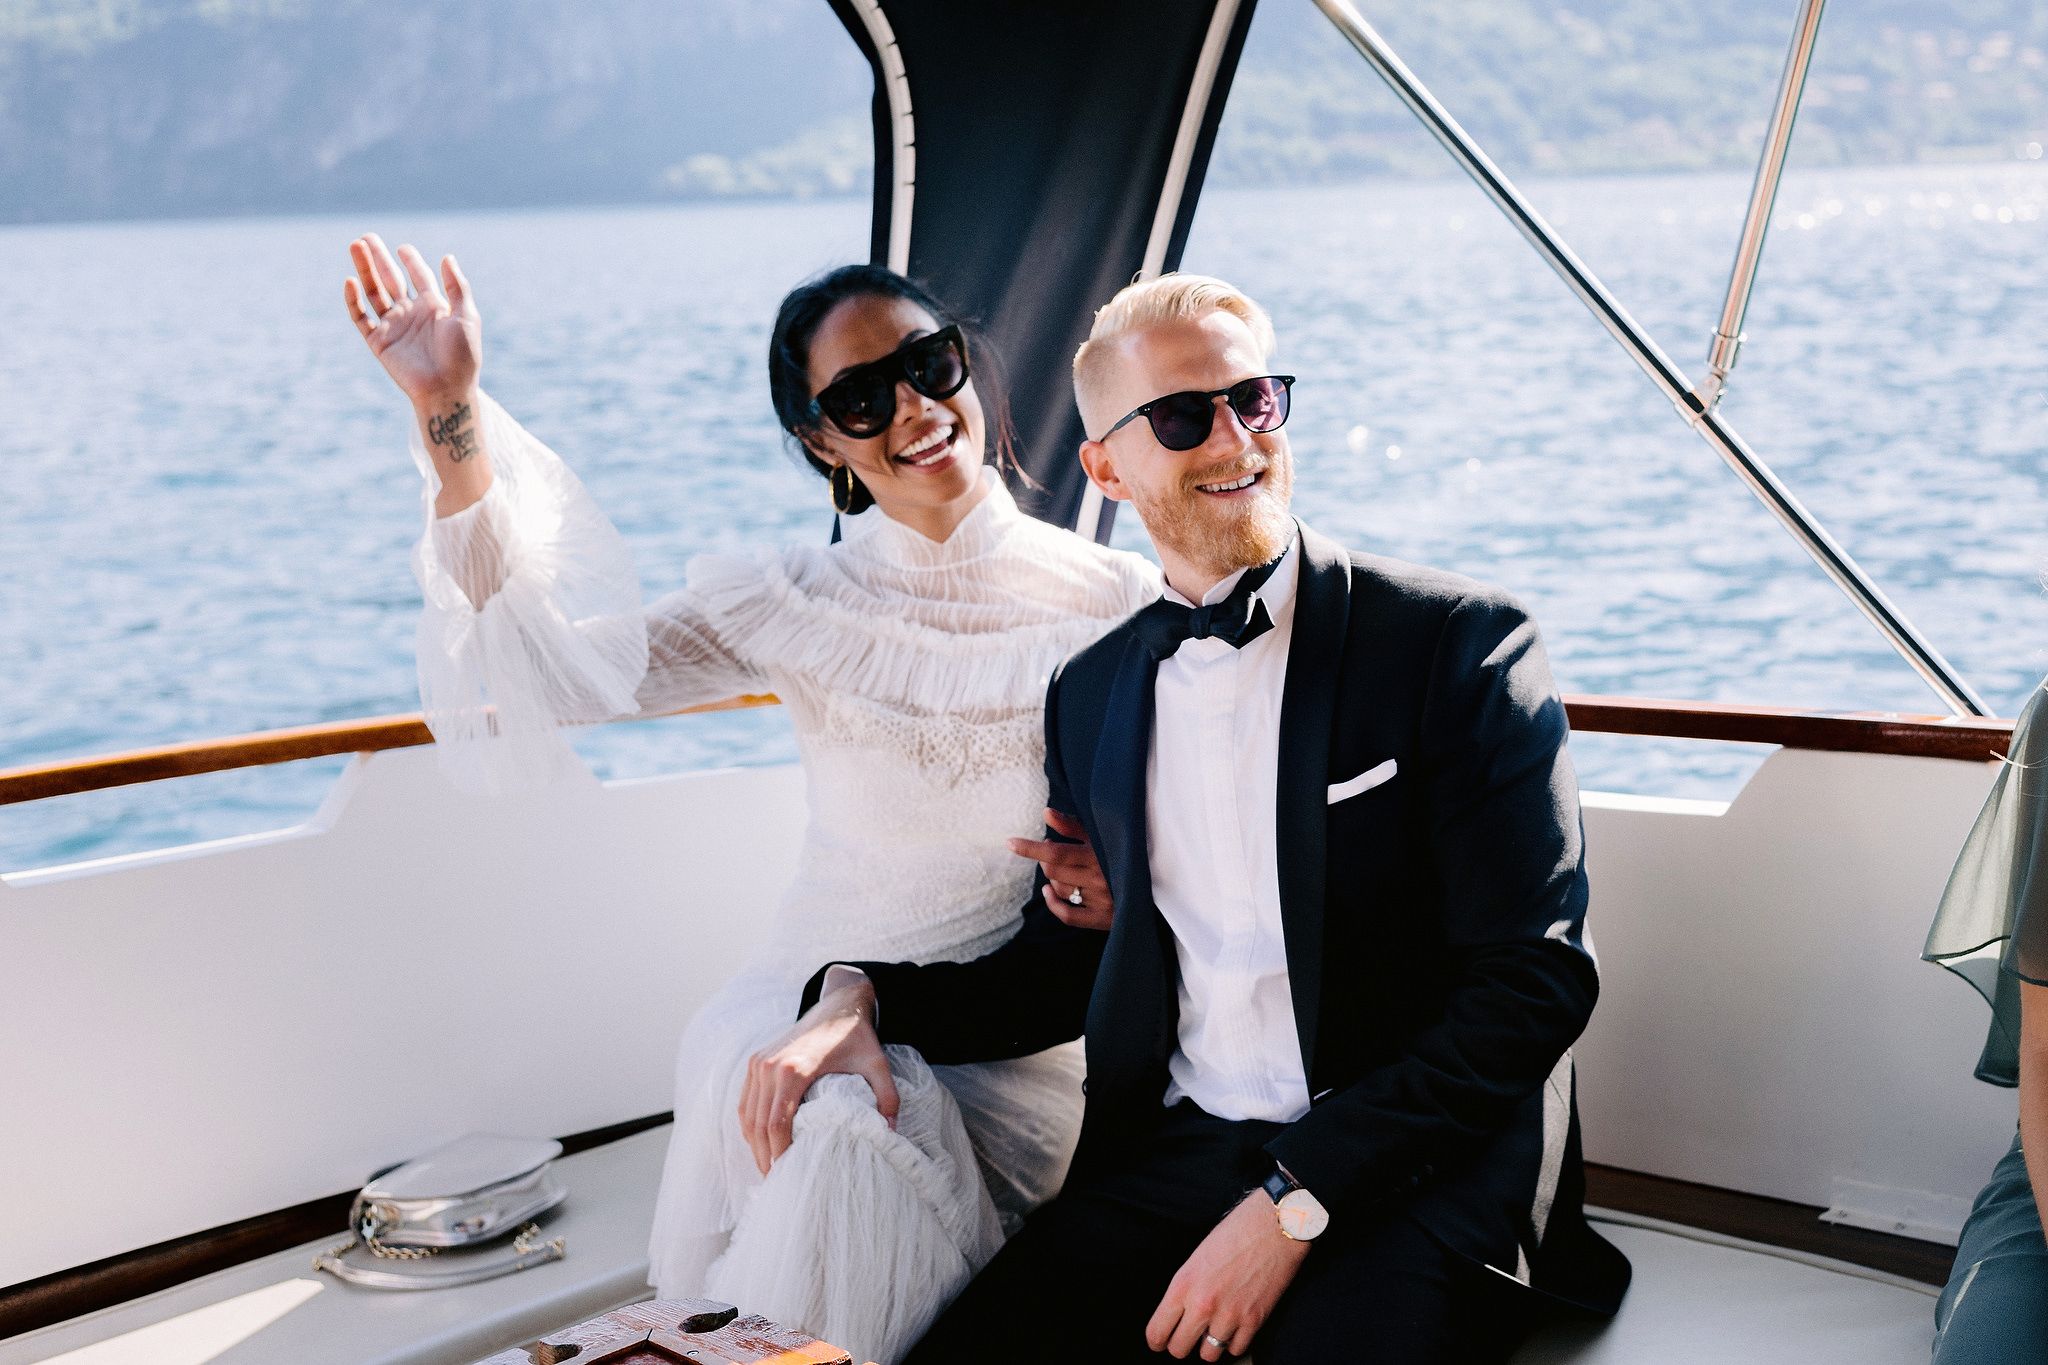 The bride and groom are happily riding a boat at Lake Como, Italy. Image by Jenny Fu Studio